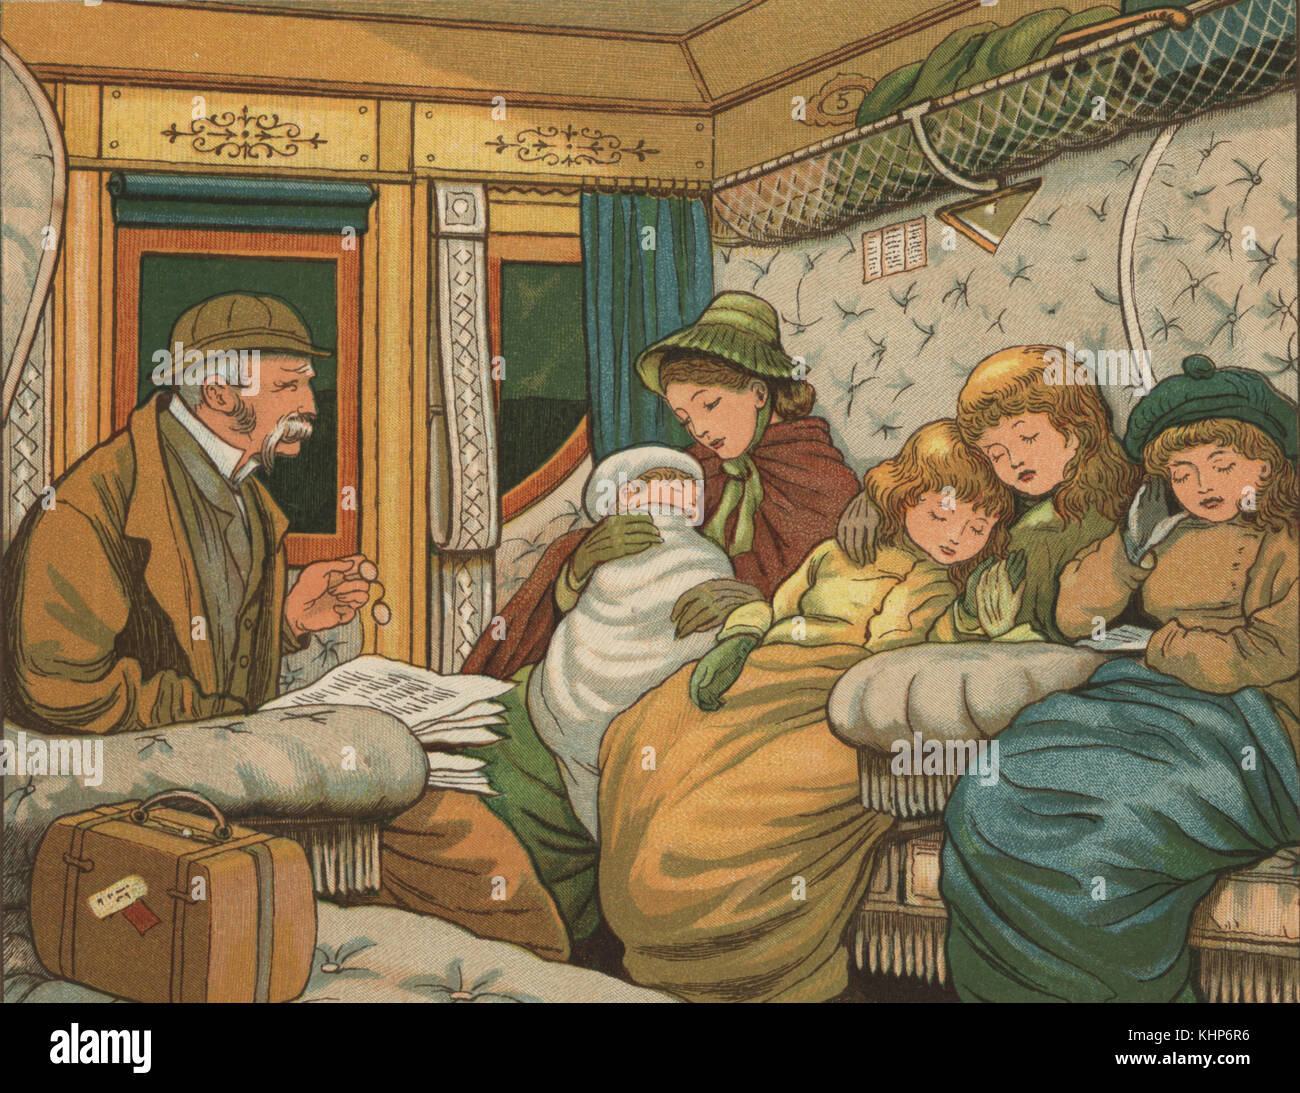 Victorian family in a carriage on the train from Paris to Calais, France. Colour woodblock after an illustration by Thomas Crane and Ellen Houghton from Abroad, Marcus Ward, London, 1882. Stock Photo